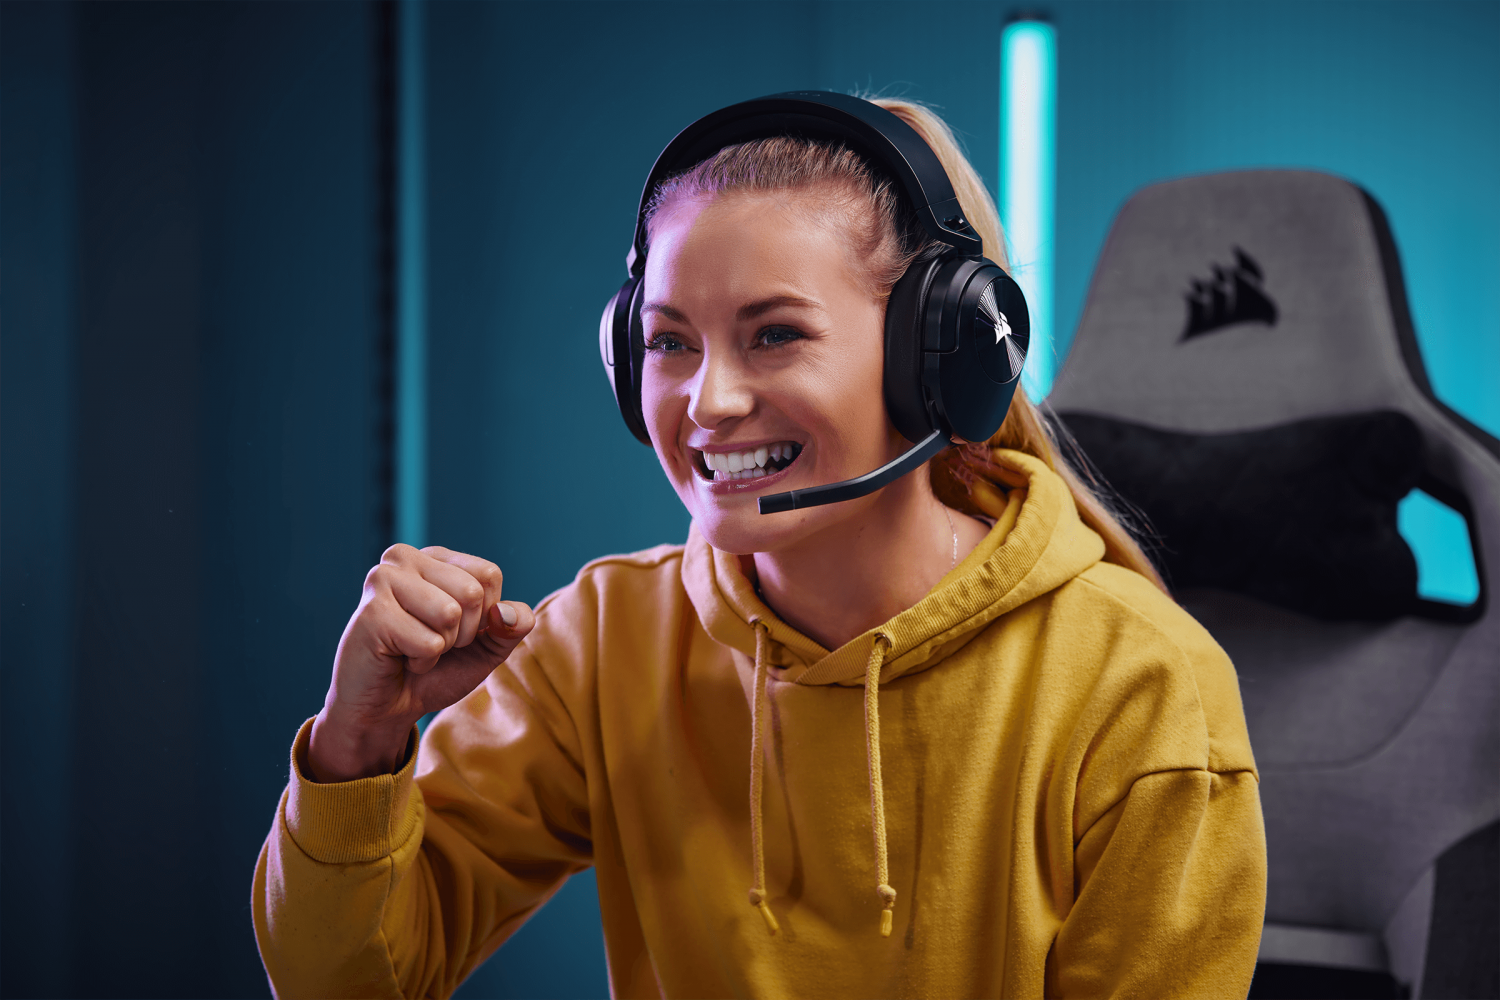 CORSAIR H255 Wireless Core Gaming Headset Revealed: Worth It at $100?